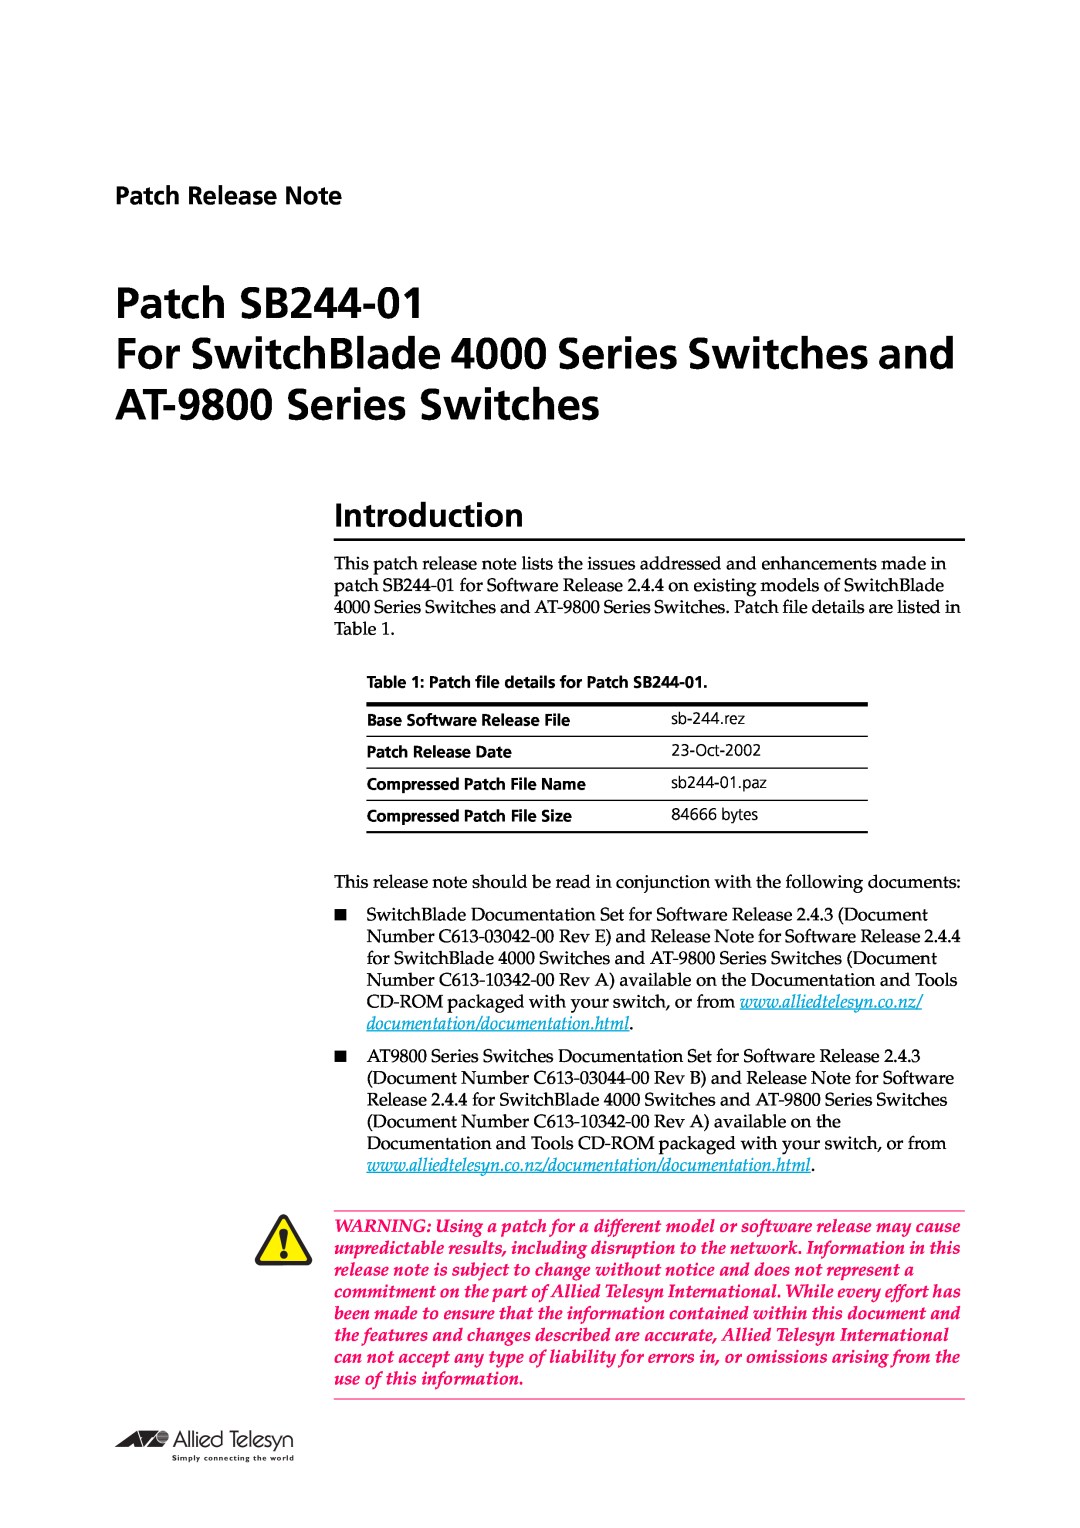 Allied Telesis manual Introduction, Patch SB244-01 For SwitchBlade 4000 Series Switches and, AT-9800 Series Switches 